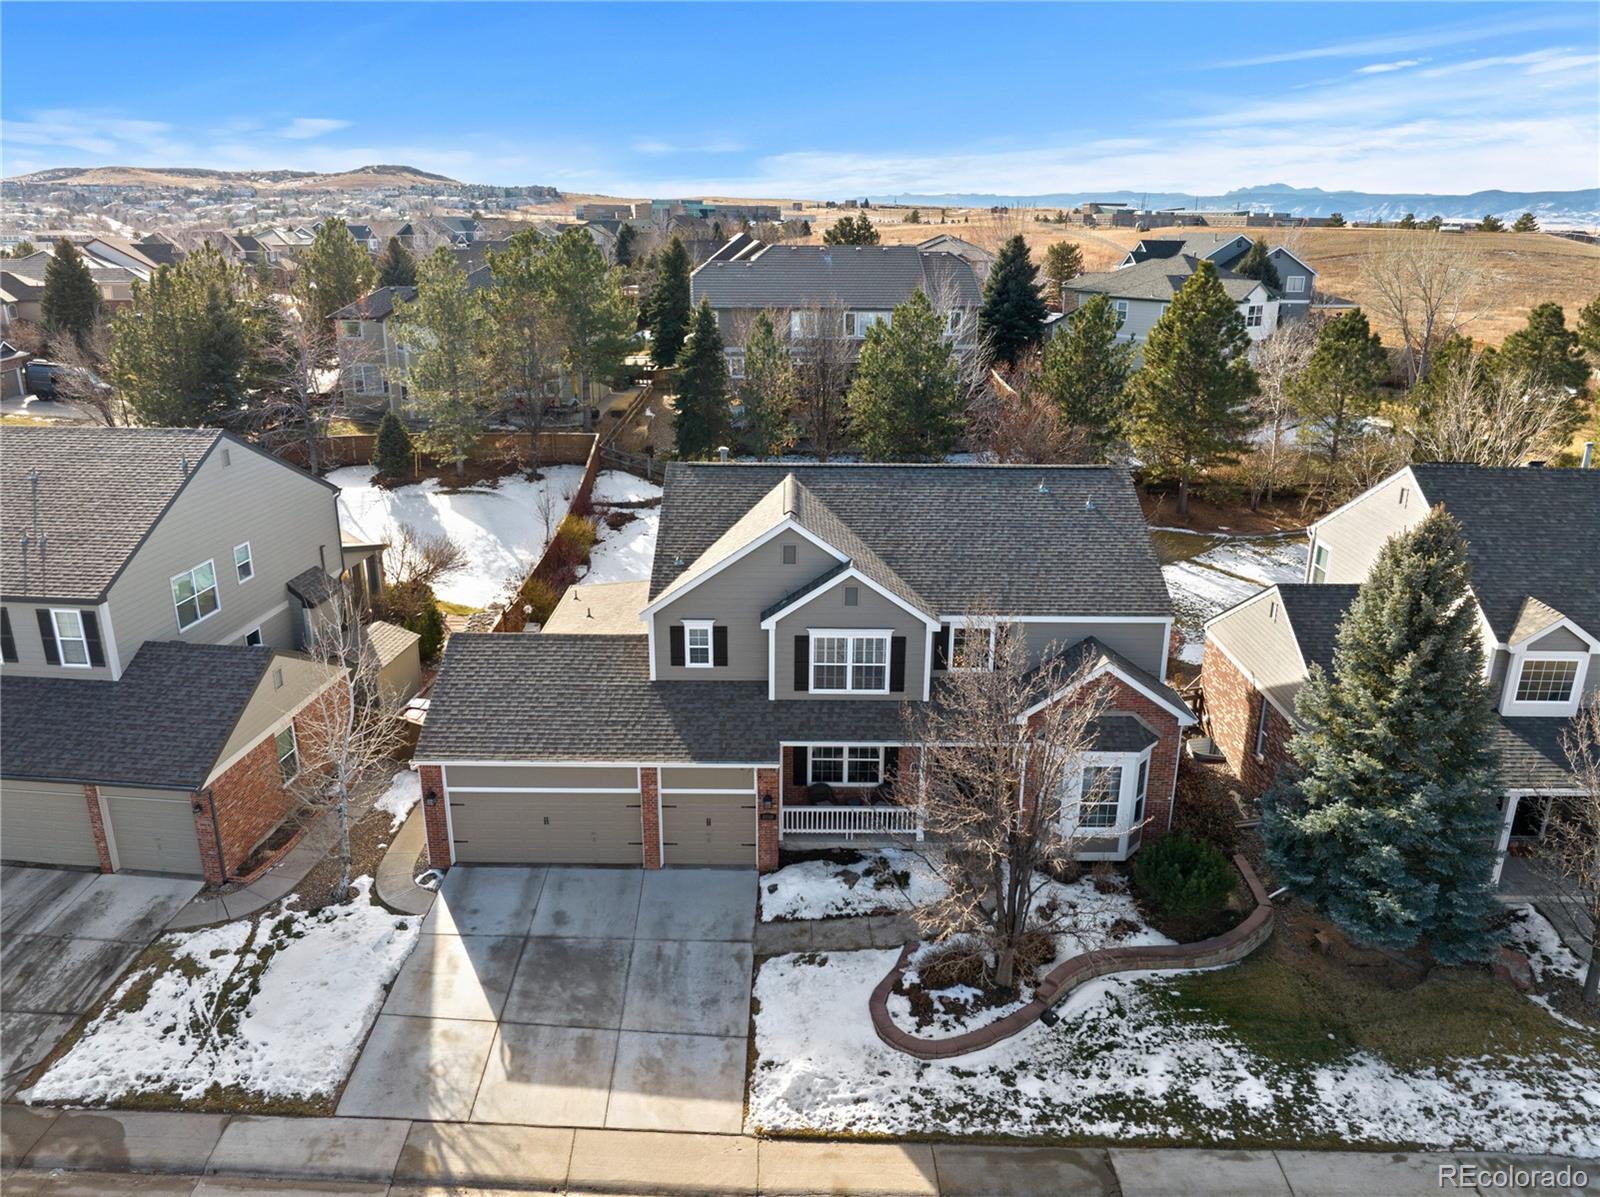 Report Image for 2250  Briargrove Drive,Highlands Ranch, Colorado